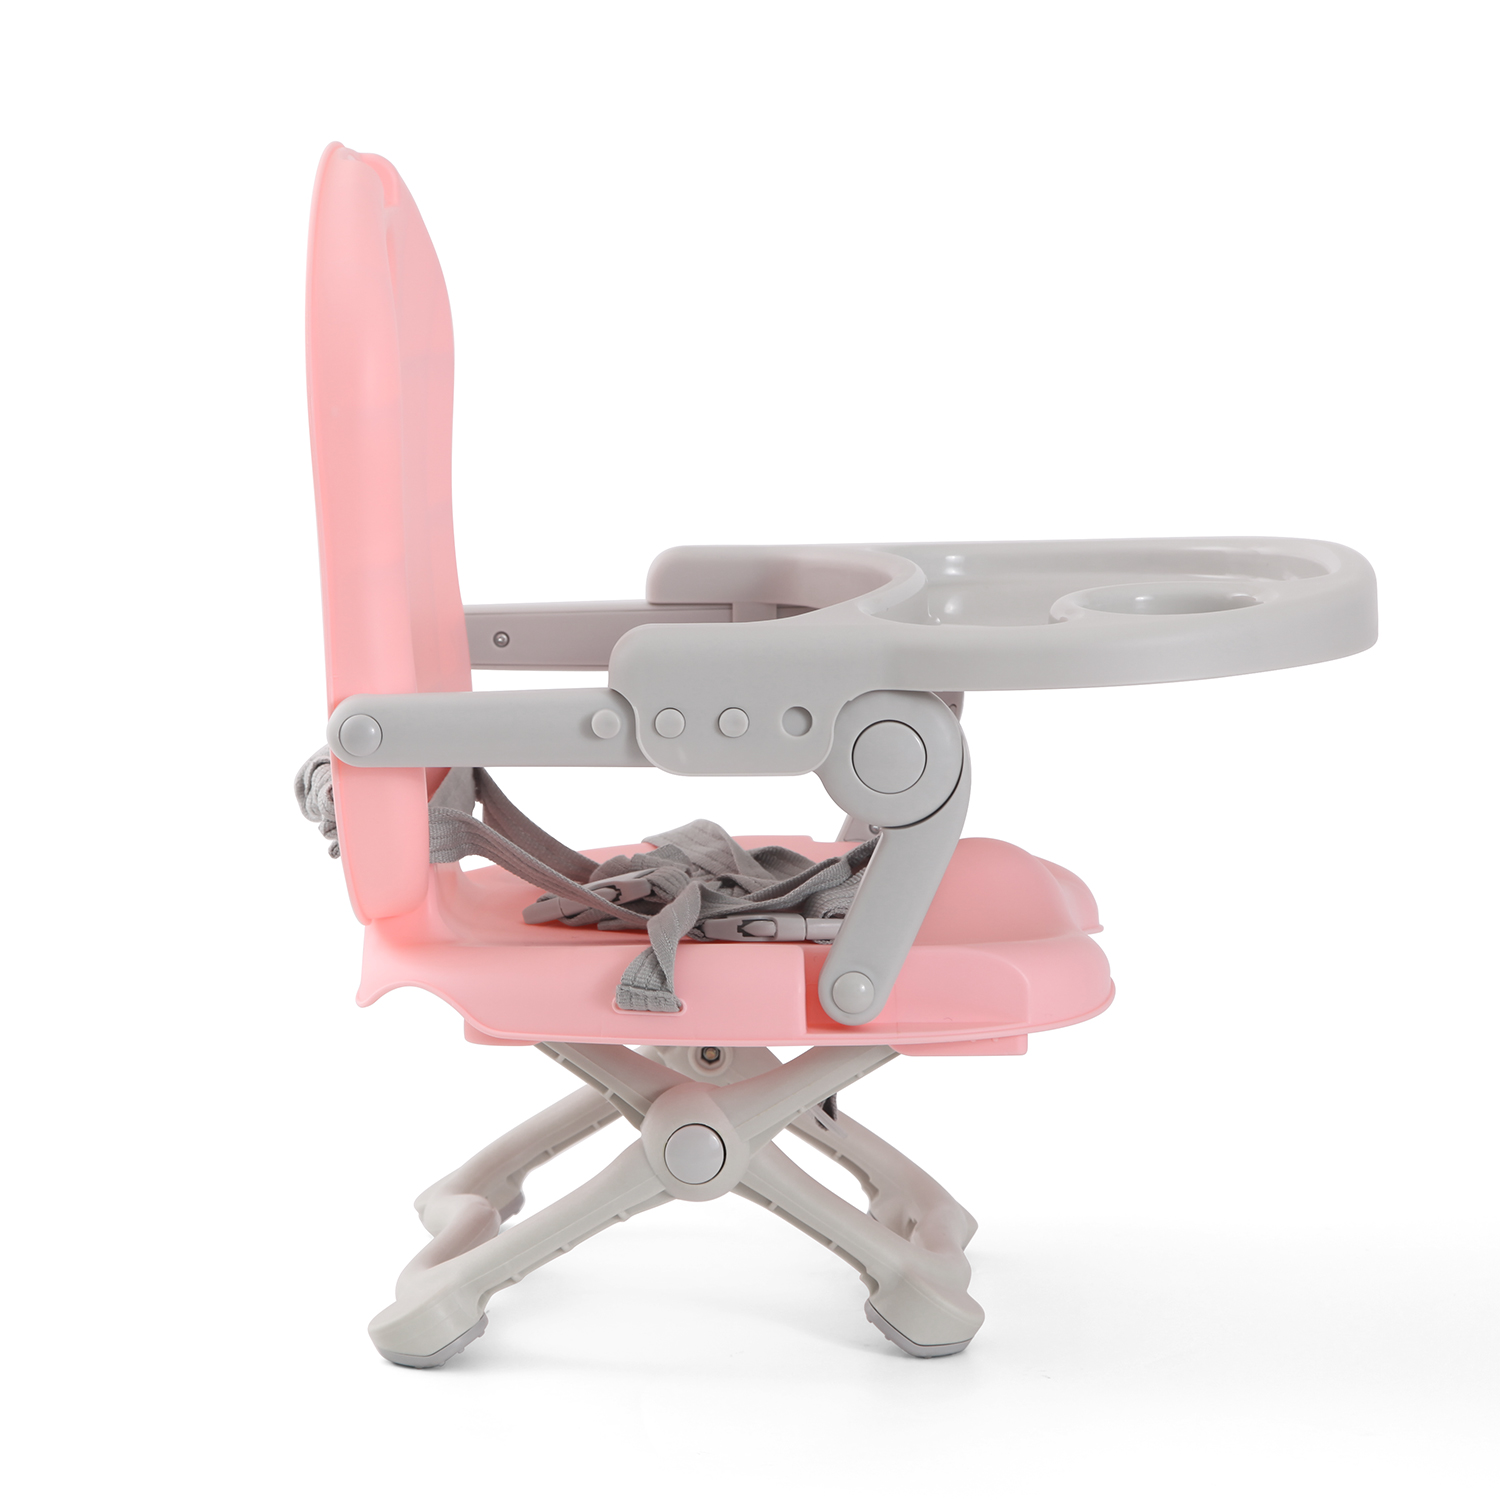 Baby Travel Dining Chair - Pink,Baby Travel Dining Chair - Pink